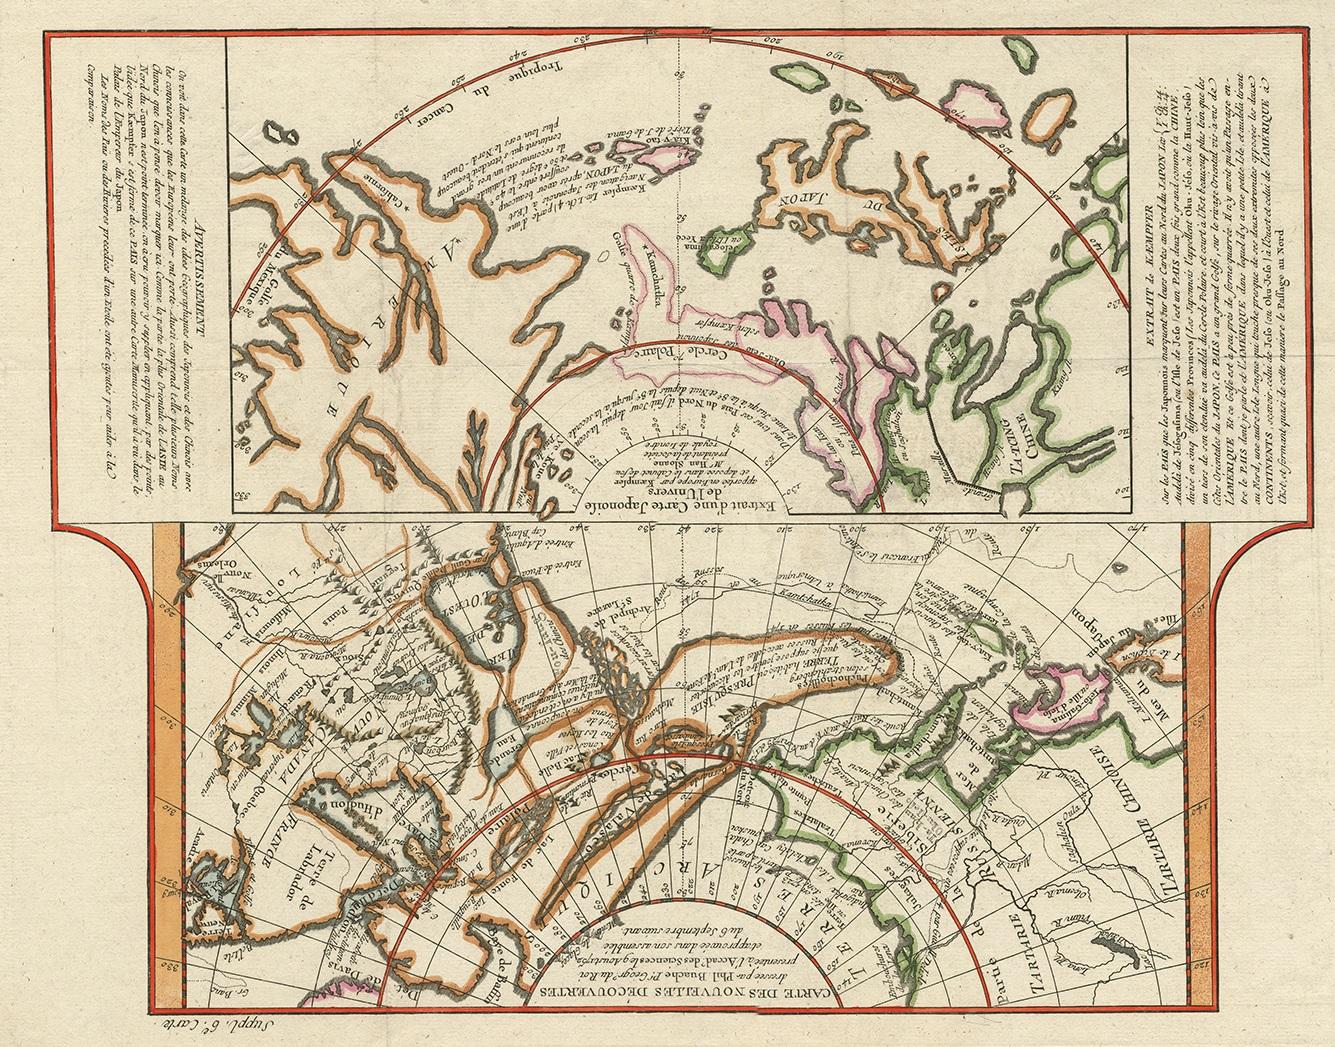 Antique map titled 'Carte des nouvelles decouvertes/ Extrait d'une Carte Japonoise de l'Universe'. Map of the West Coast of North America and North-East Coast of Asia, based upon Buache's report of the various Russian Discoveries between 1731 and